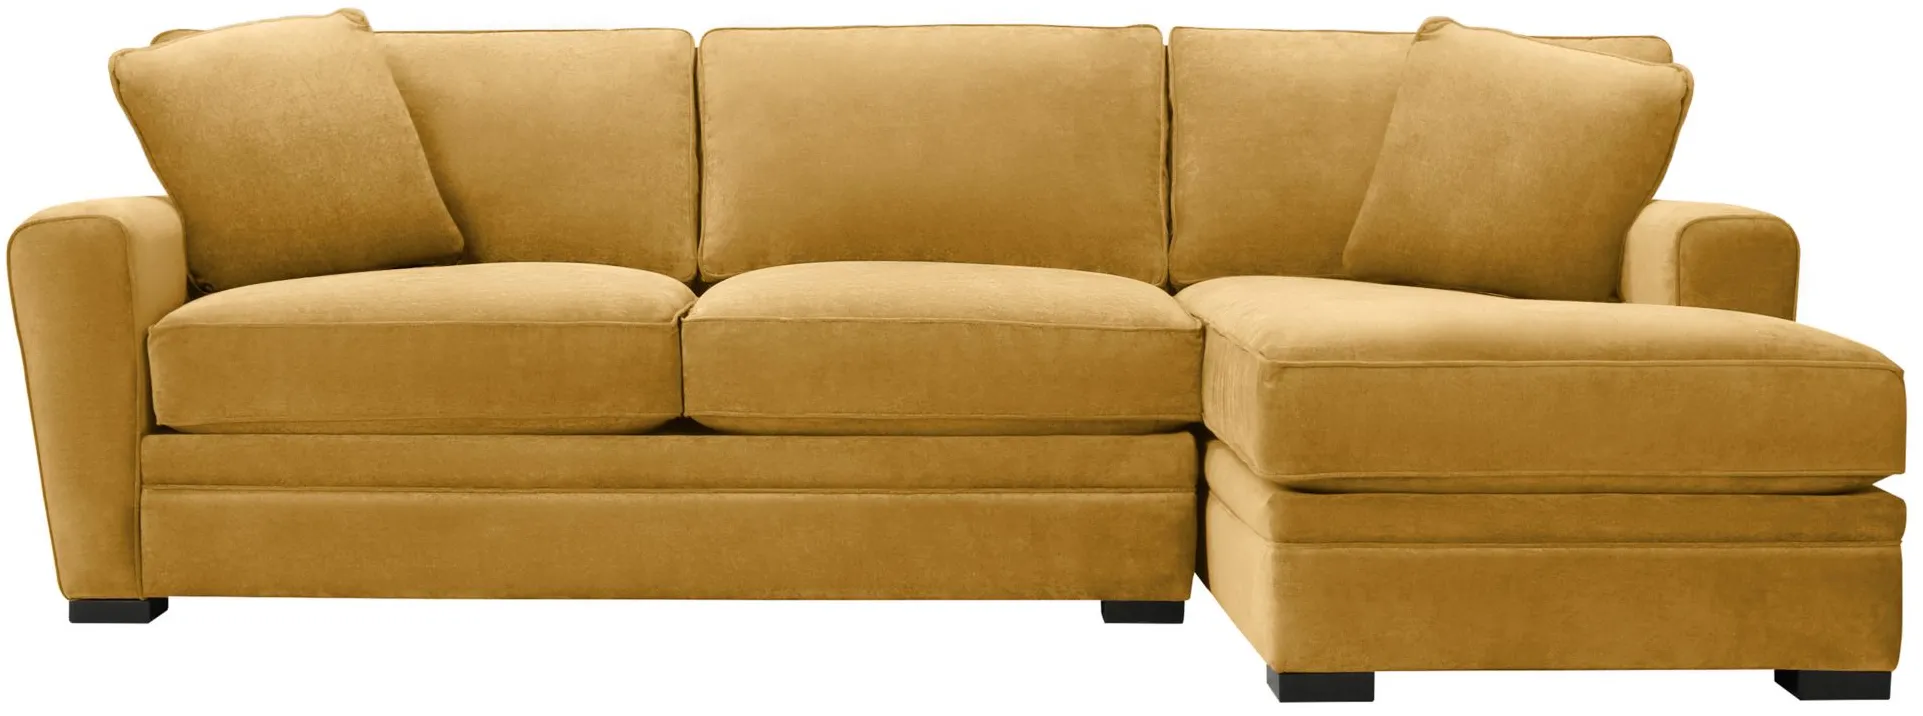 Artemis II 2-pc. Full Sleeper Right Hand Facing Sectional Sofa in Gypsy Arrow by Jonathan Louis